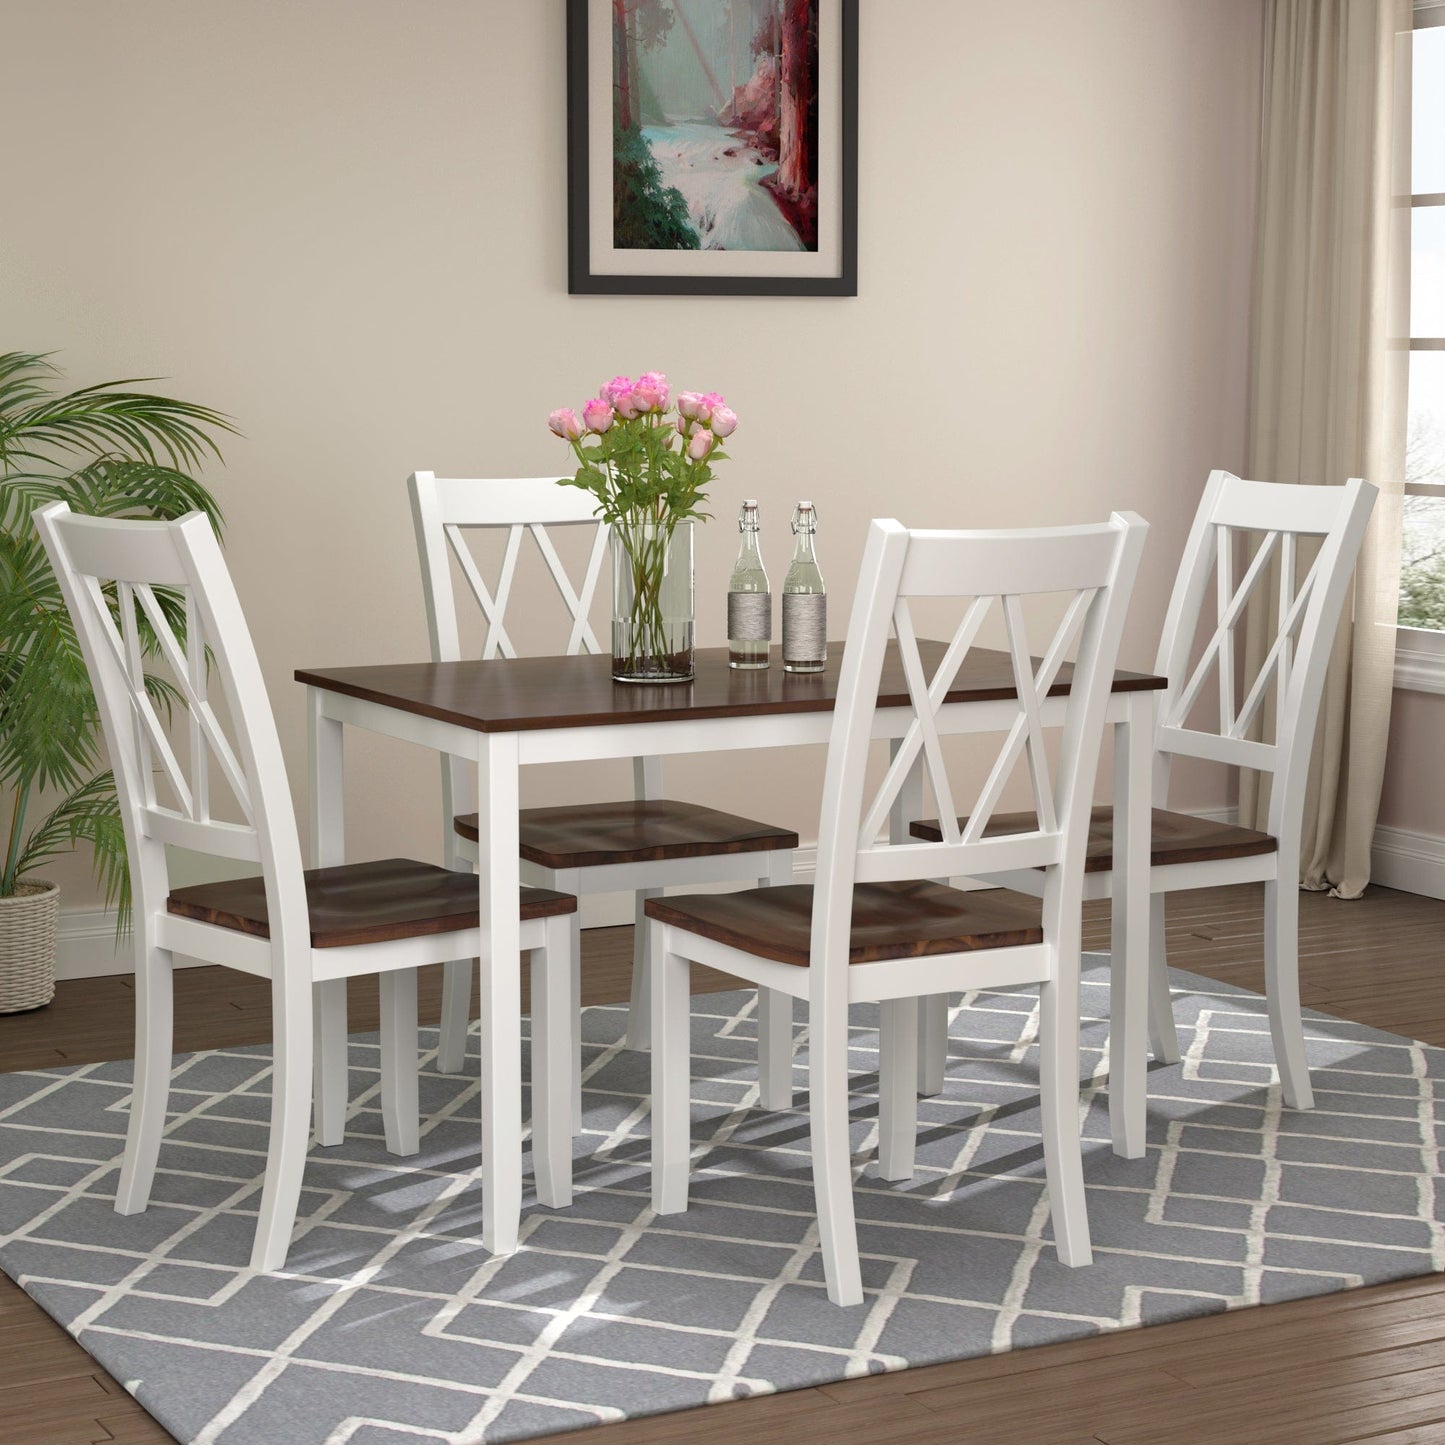 1st Choice Furniture Direct Dining Room Sets 1st Choice Rustic 5-Piece Kitchen Dining Set in White and Cherry